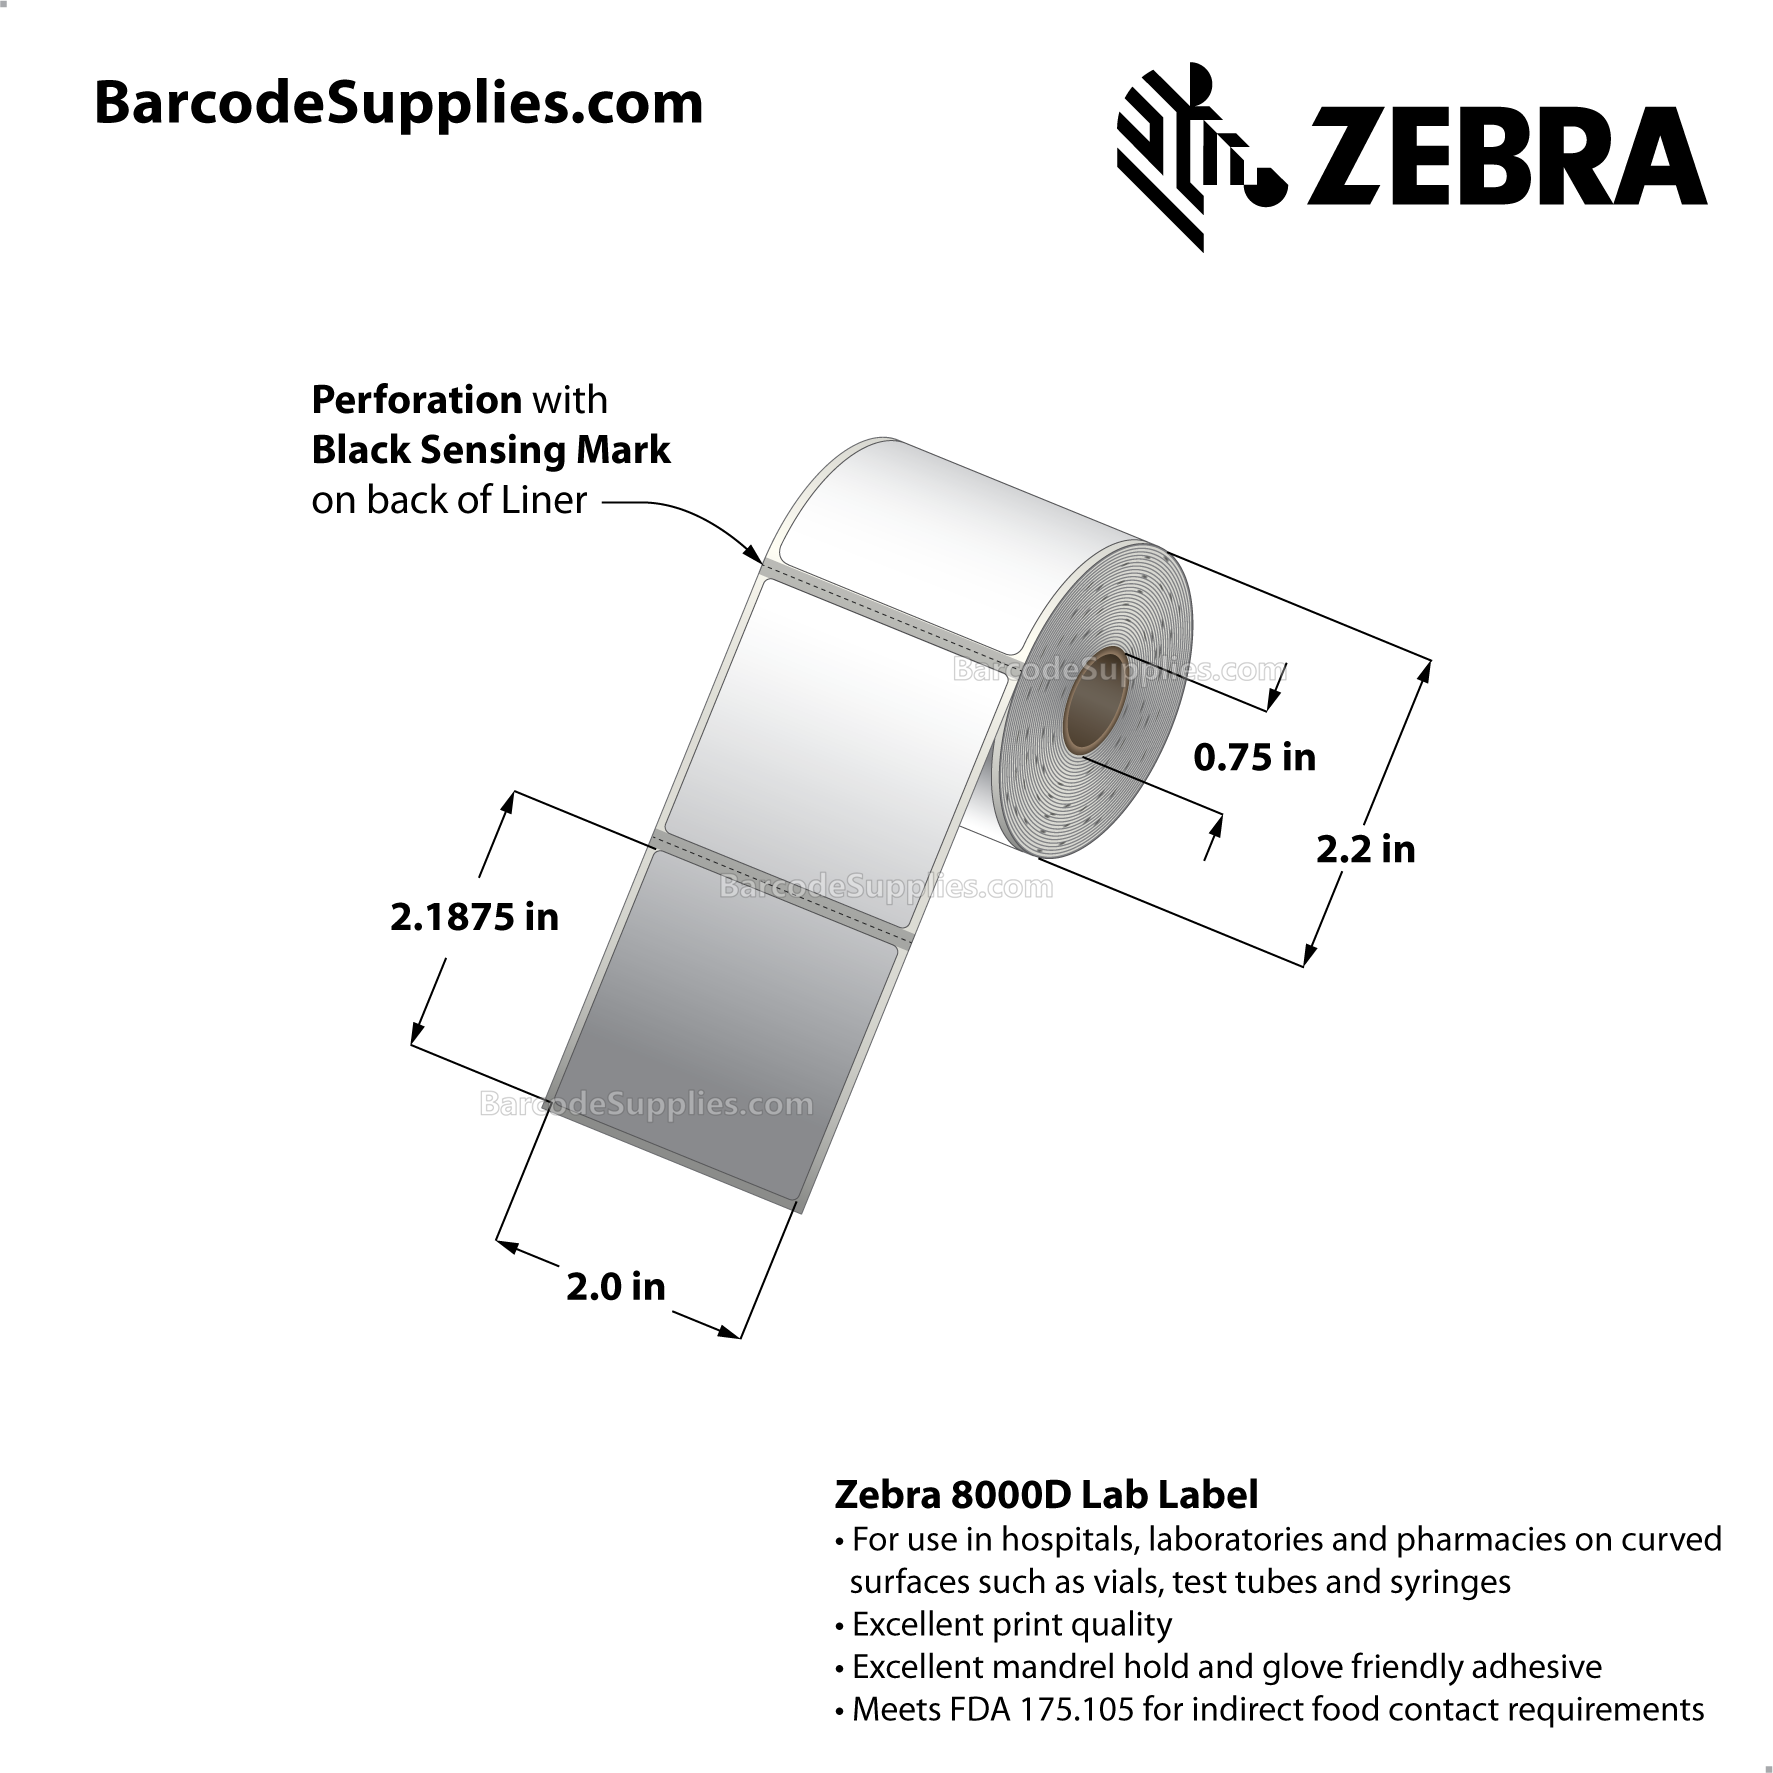 Zebra Jewelry Labels - Barbell Style - LV-10010064